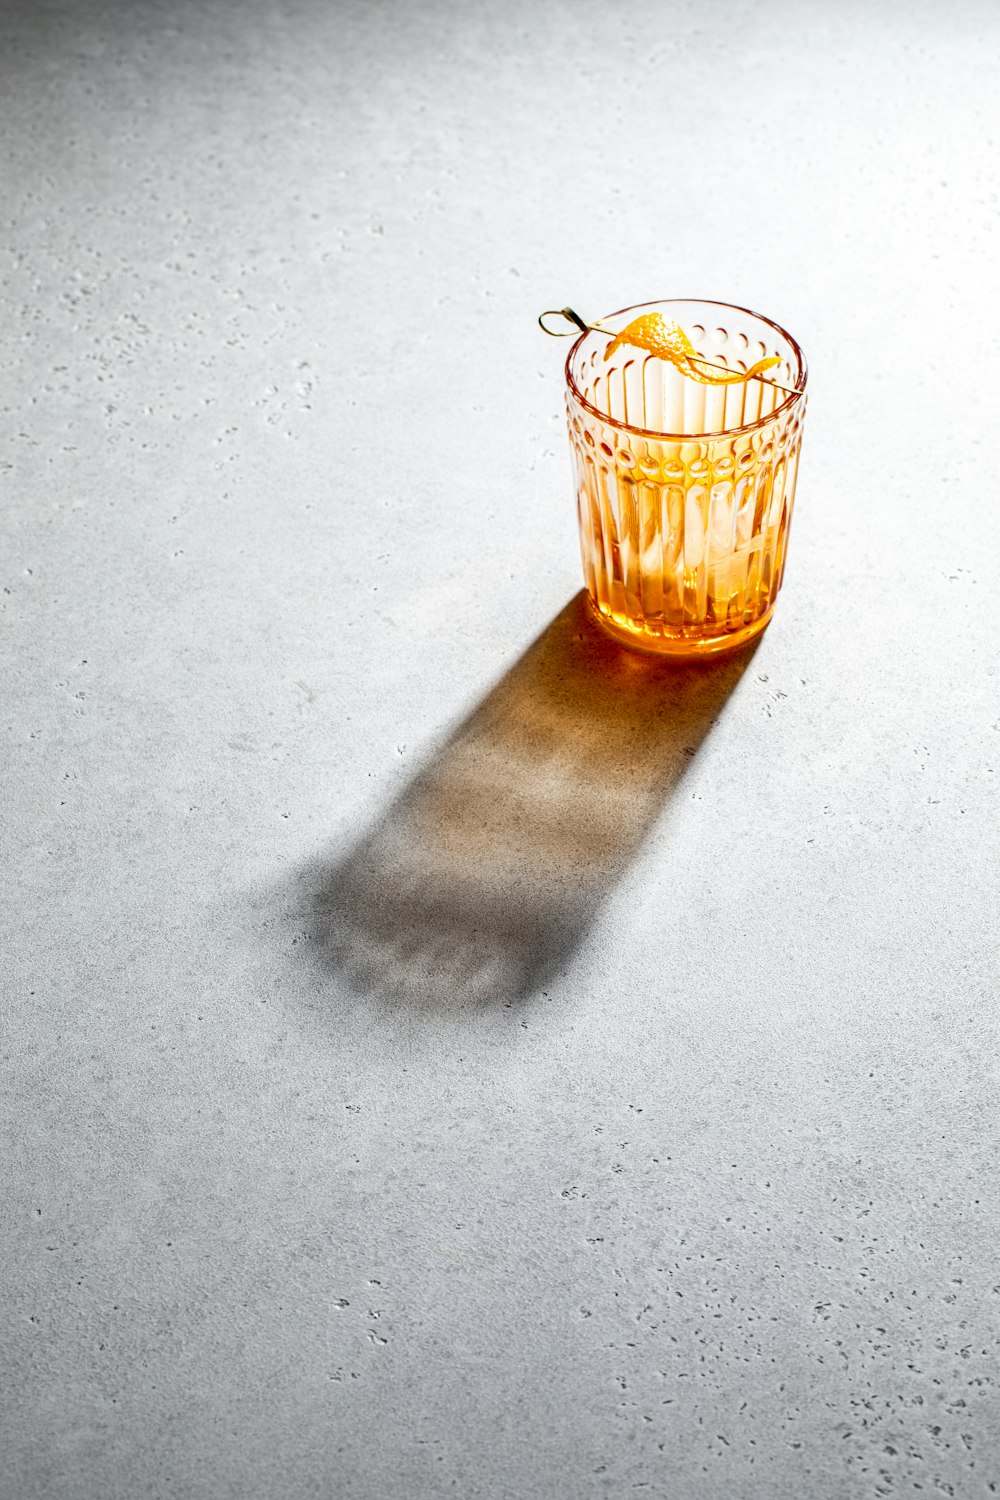 a glass of orange juice casting a shadow on the floor